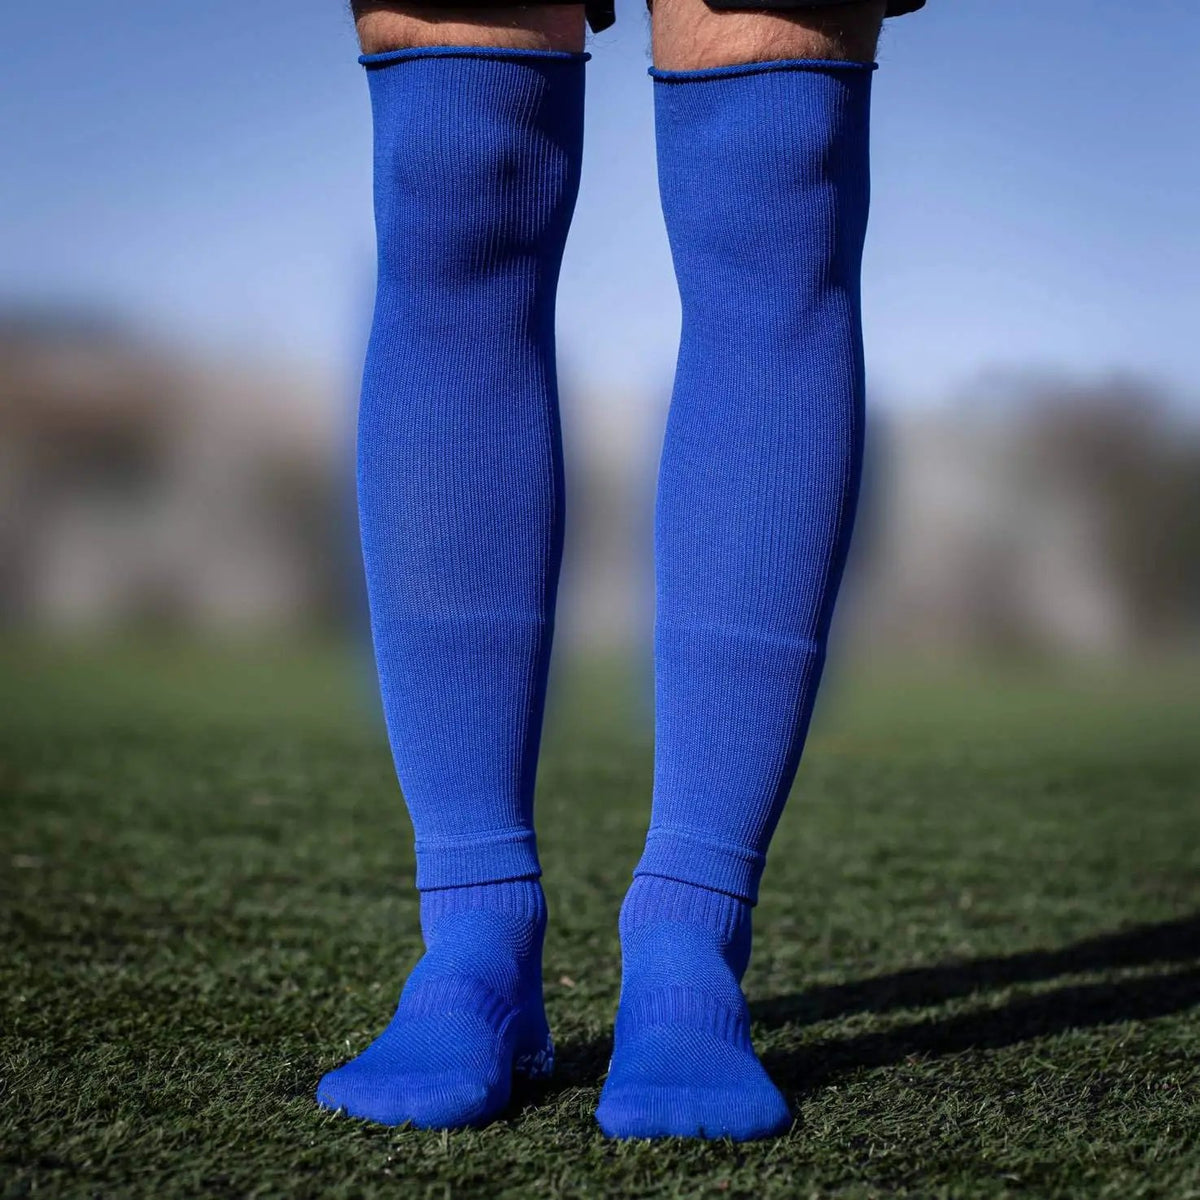 Football Sock Sleeves To Accompany Grip Socks - Fits Over Calf/Shin Pads -  Variety Of Colours To Match Your Team Kit (Black) : : Fashion